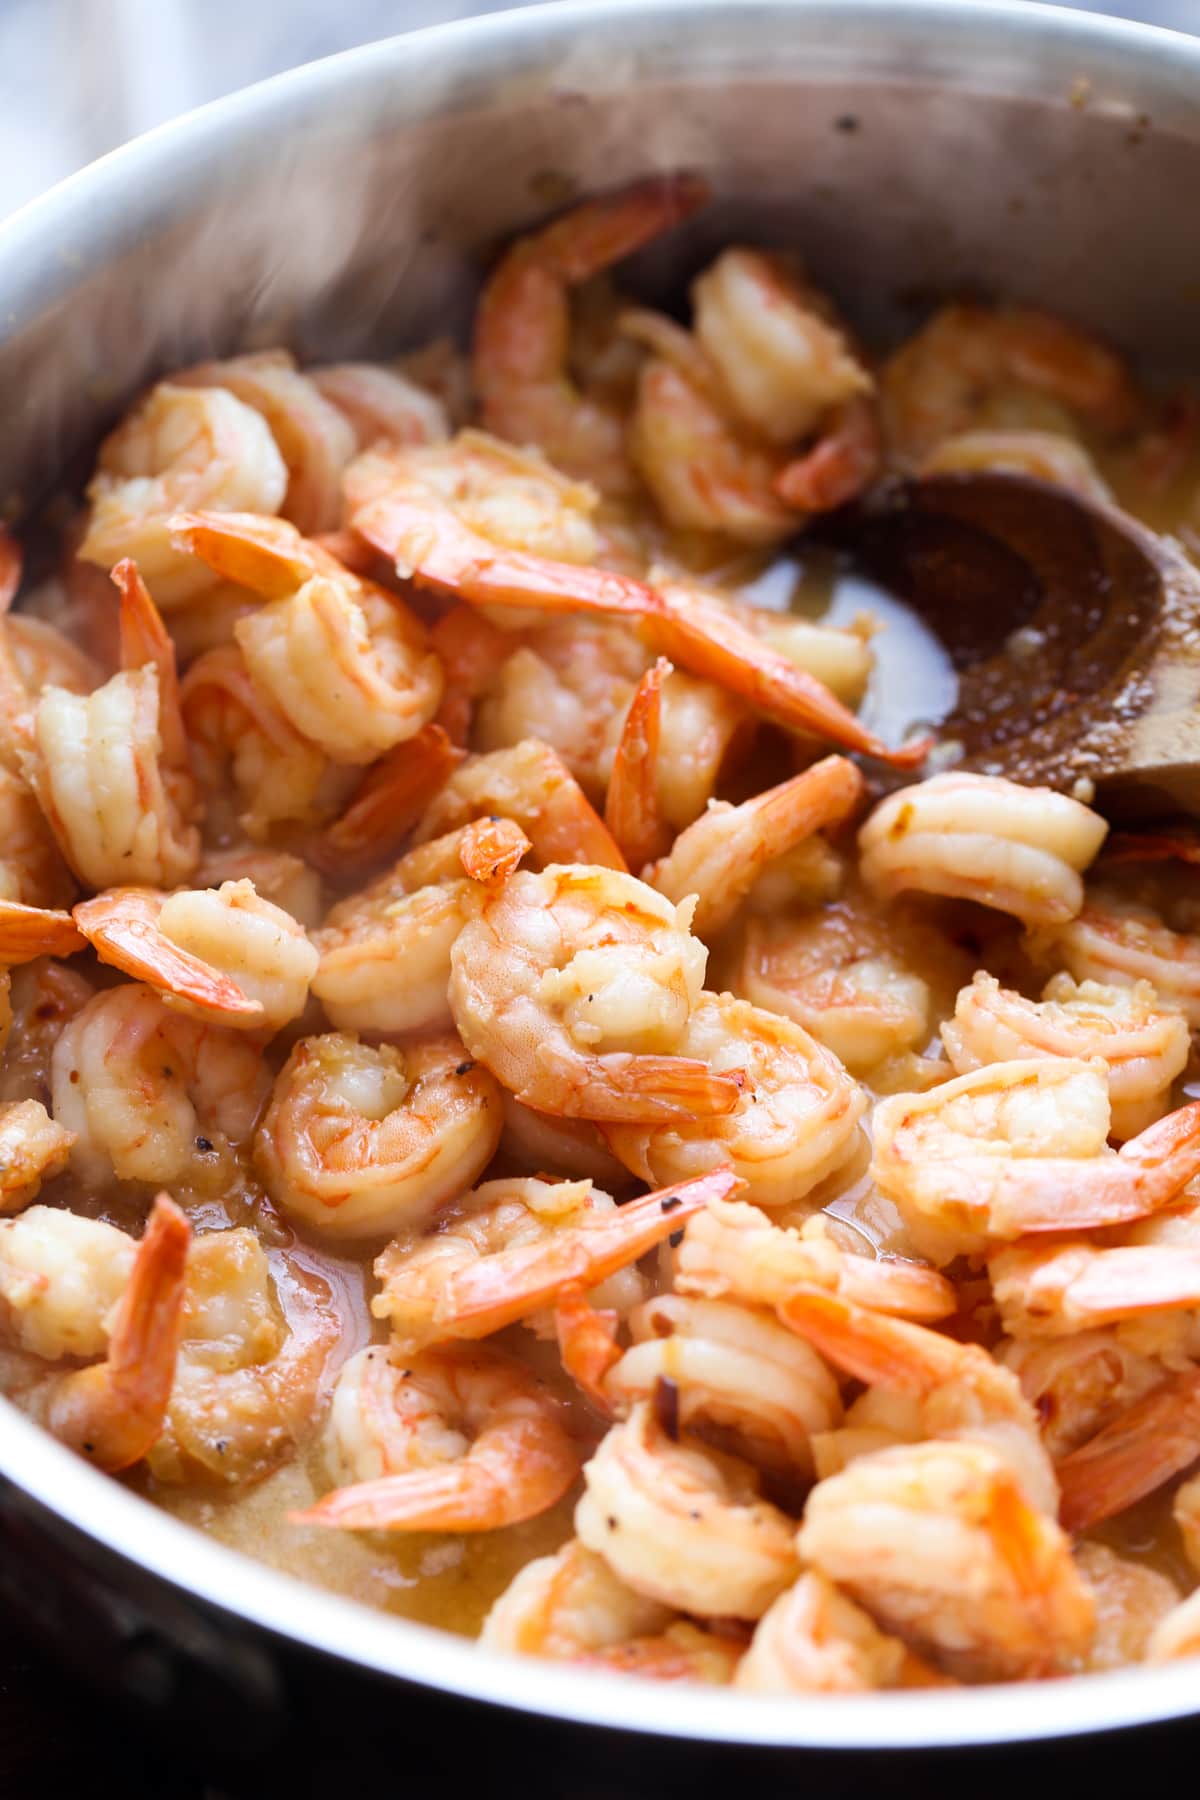 Shrimp cooked in a butter sauce.